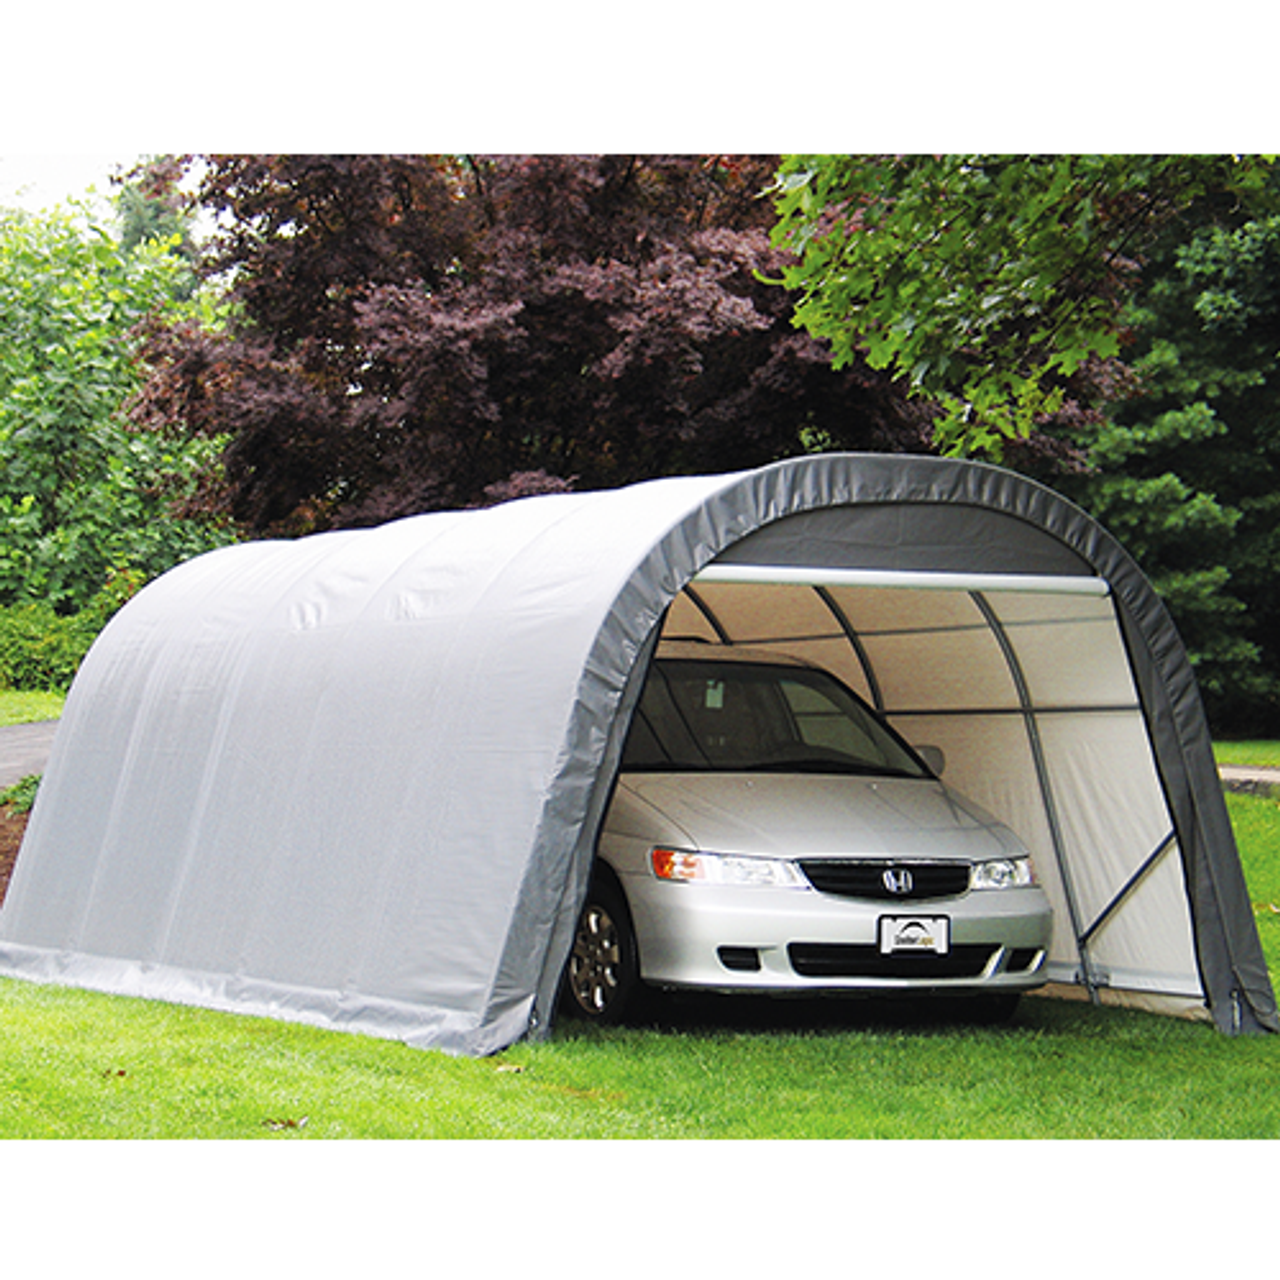 Portable Garage - 14' x 28' x 12' - Tall & Wide Shelter